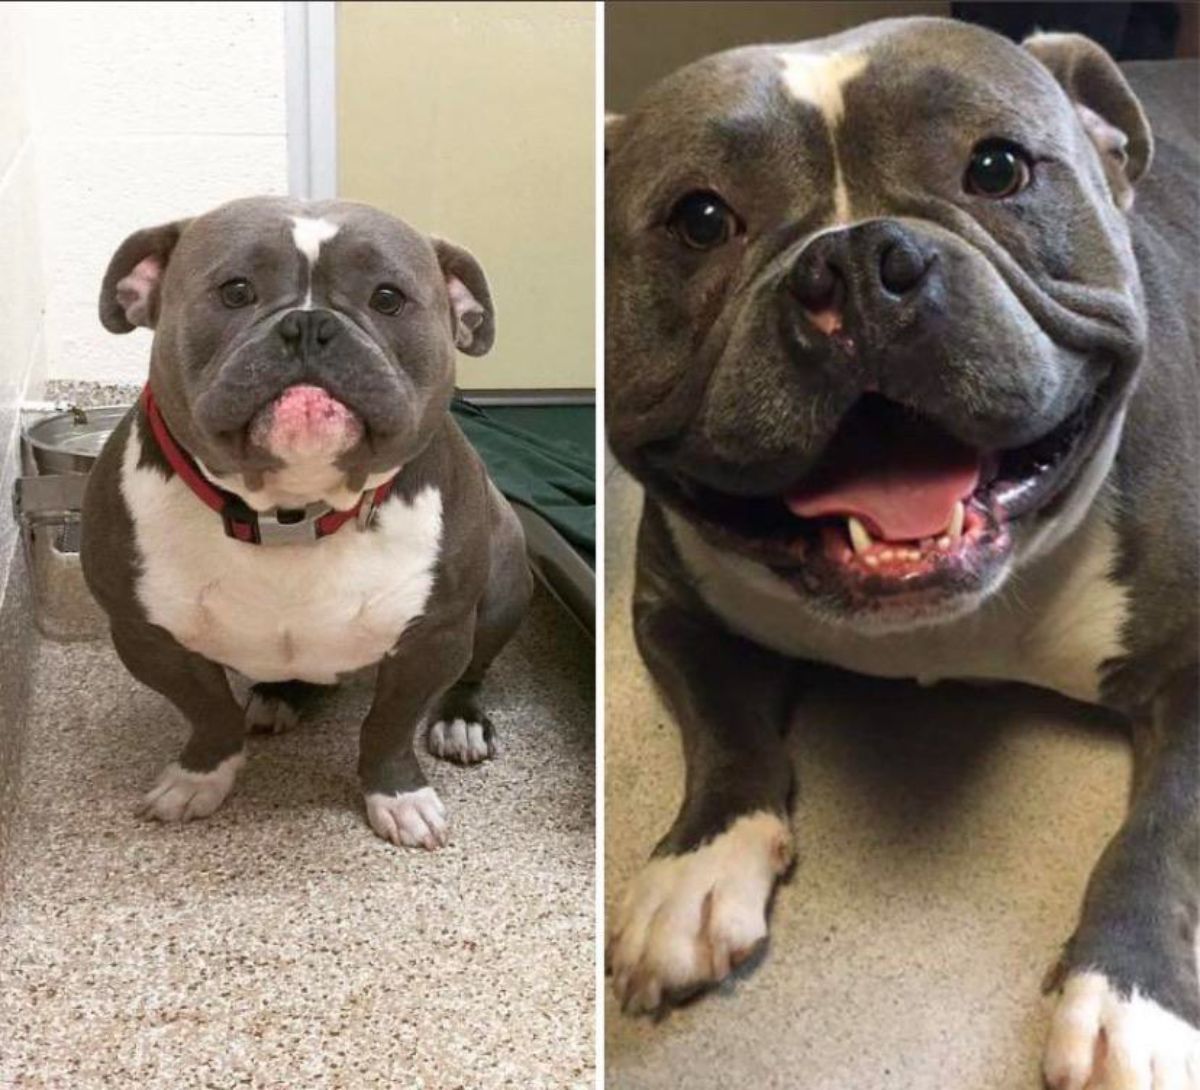 1 photo of a grey and white dog looking sad and 1 photo of the same dog smiling